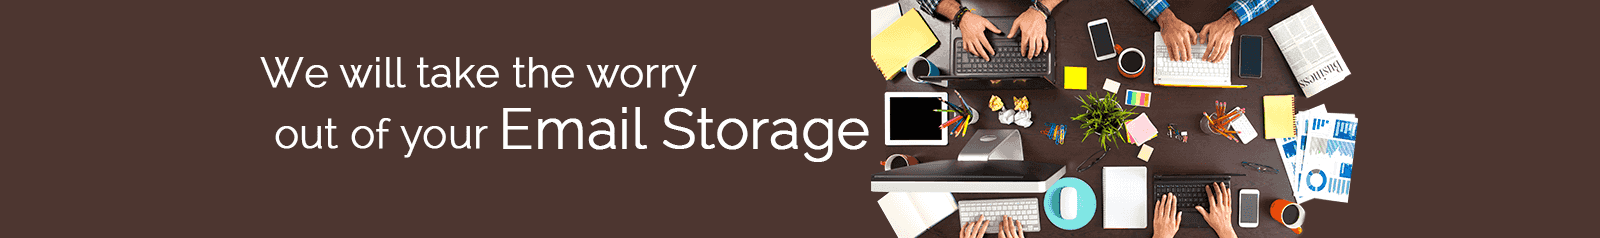 we will take the worry out of your email storage